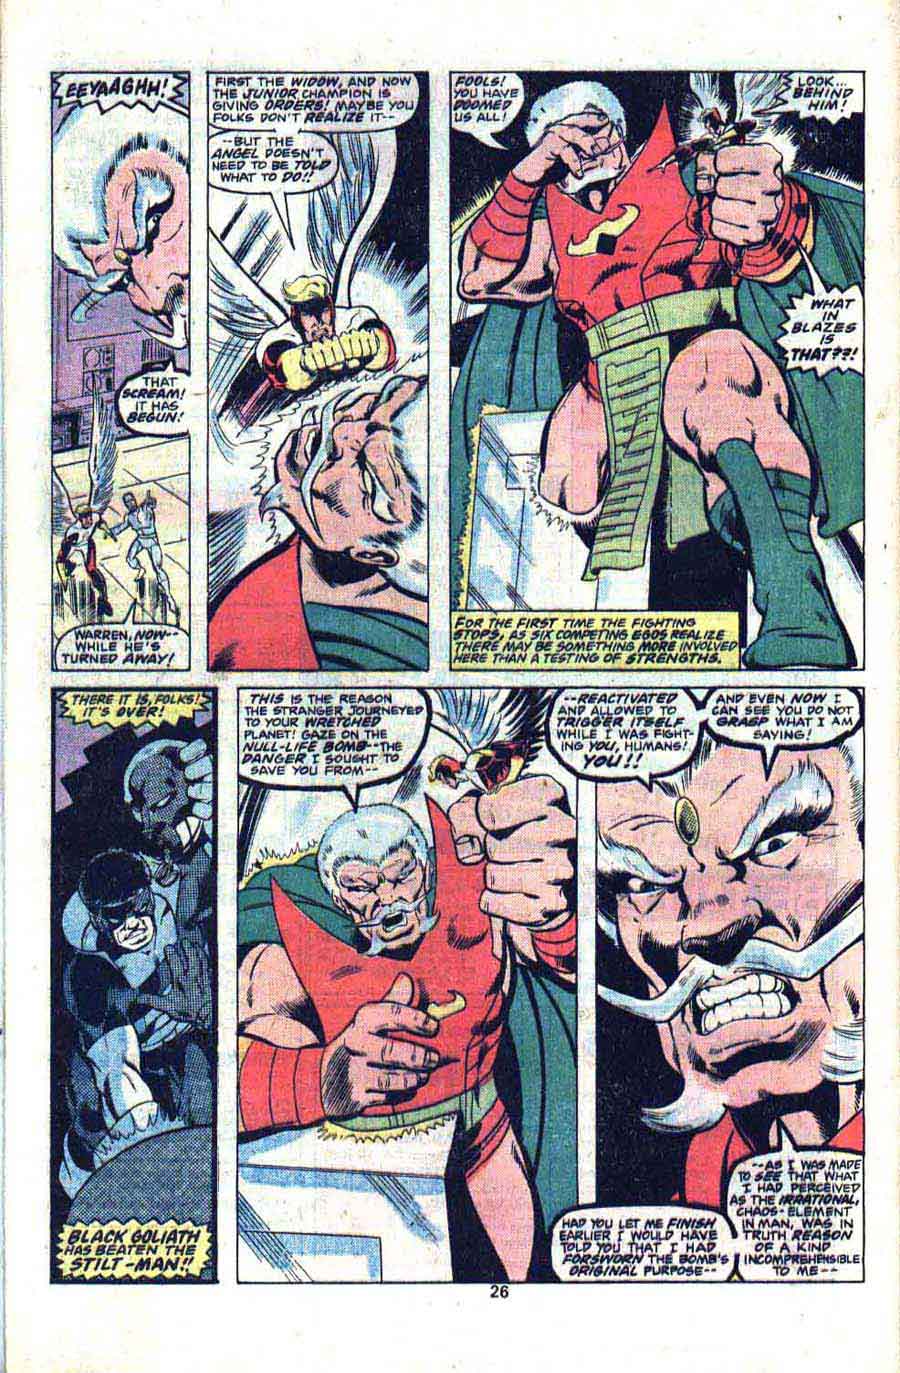 Champions #12 marvel 1970s bronze age comic book page art by John Byrne